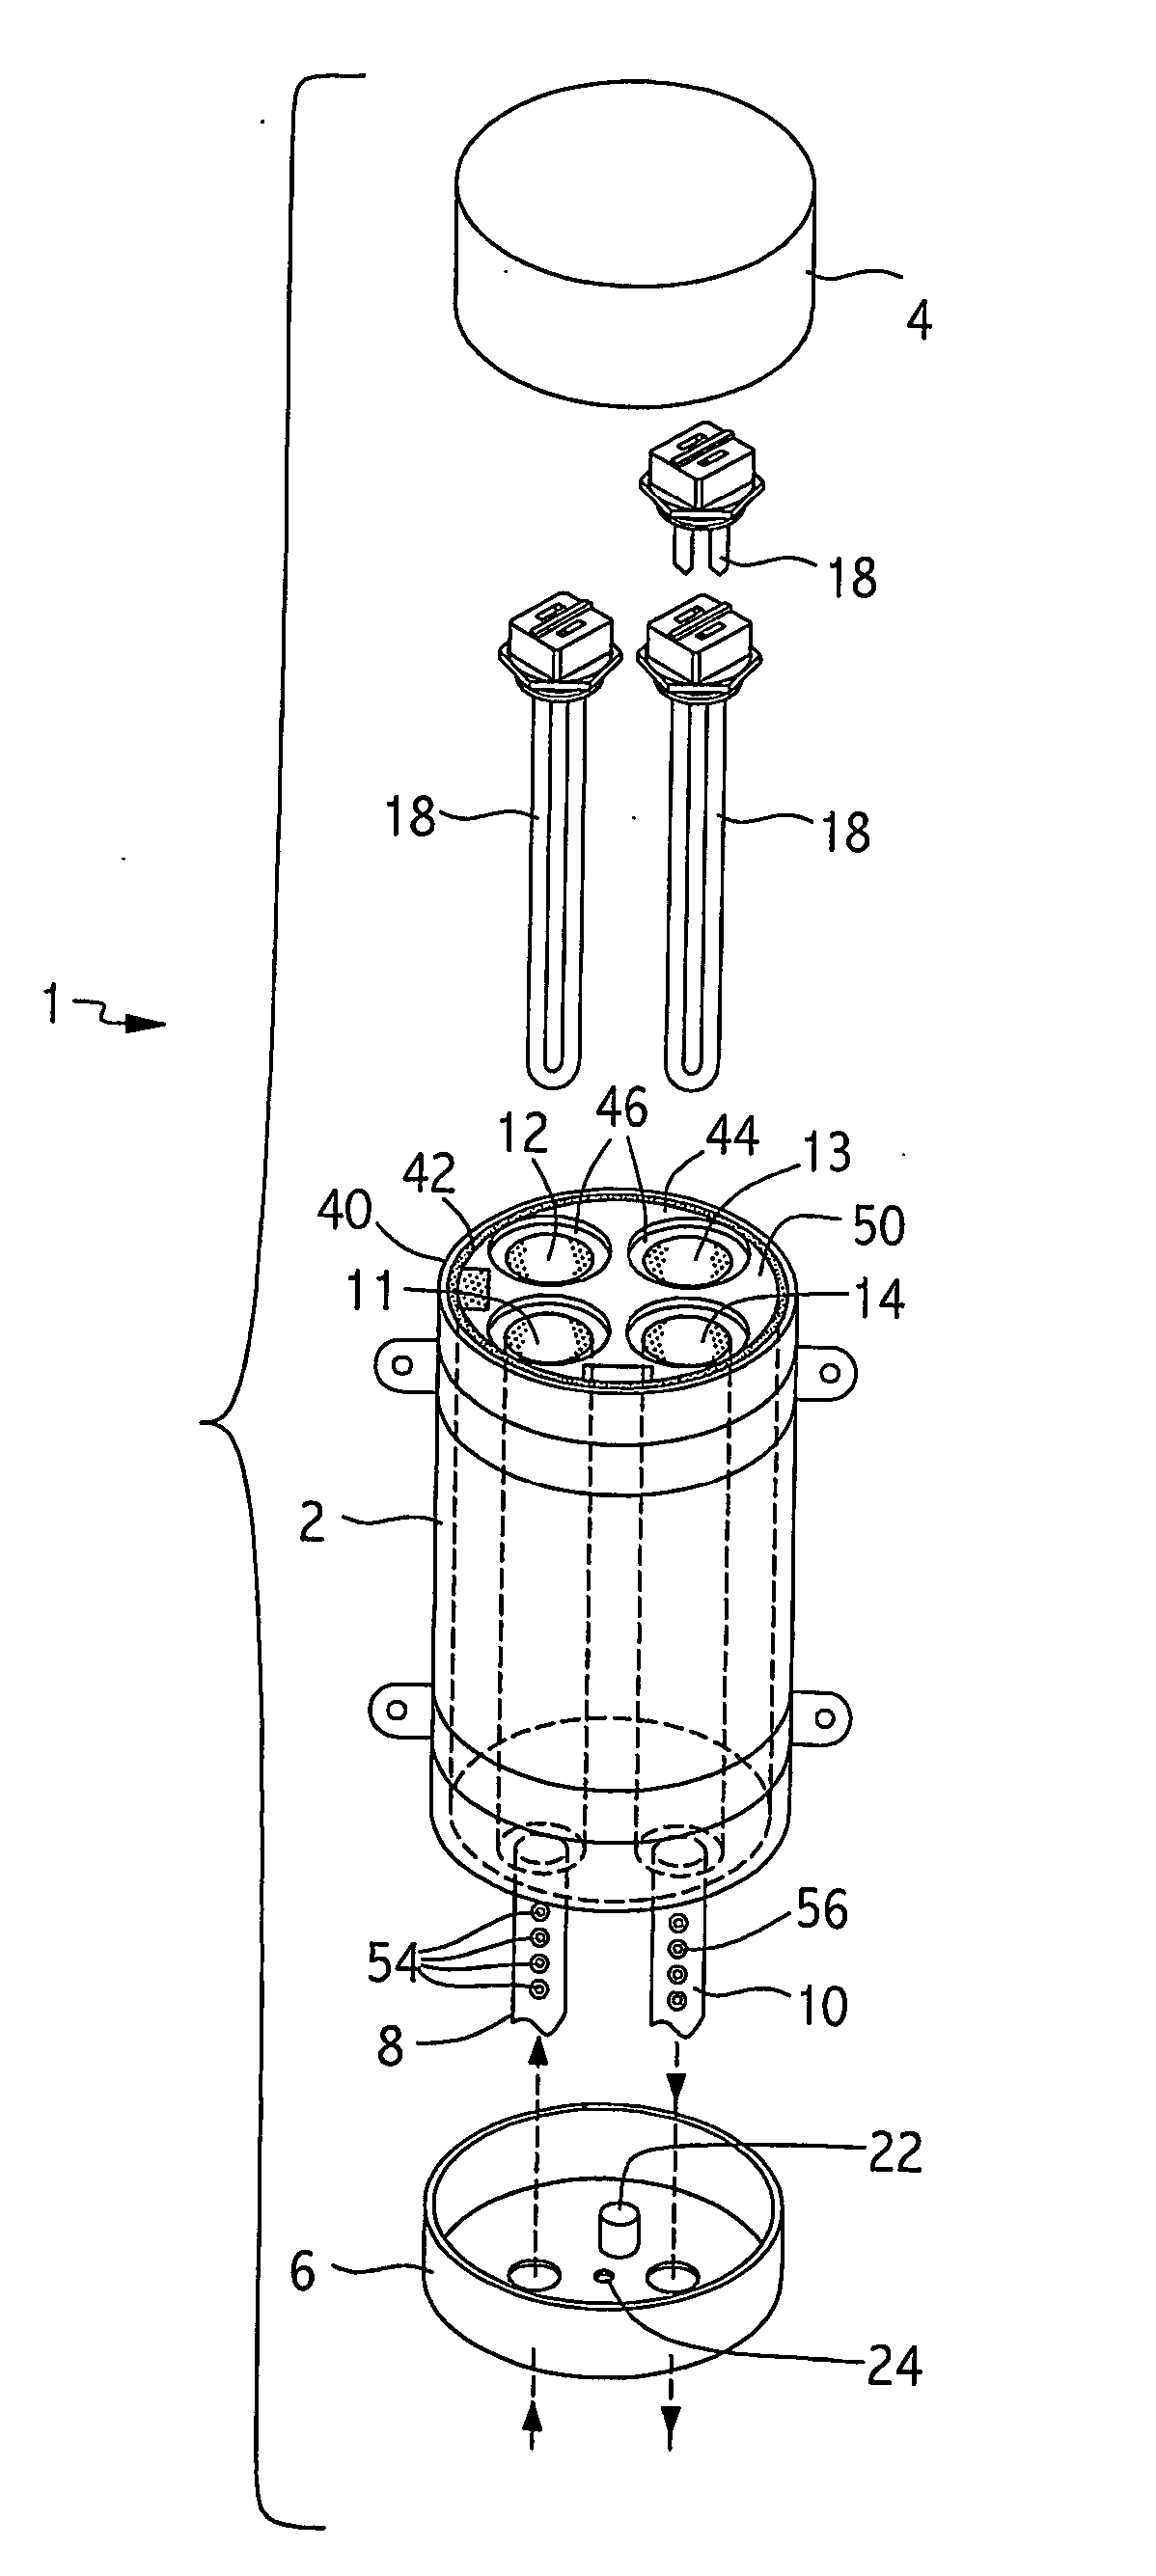 Pre-heating contiguous in-line water heater